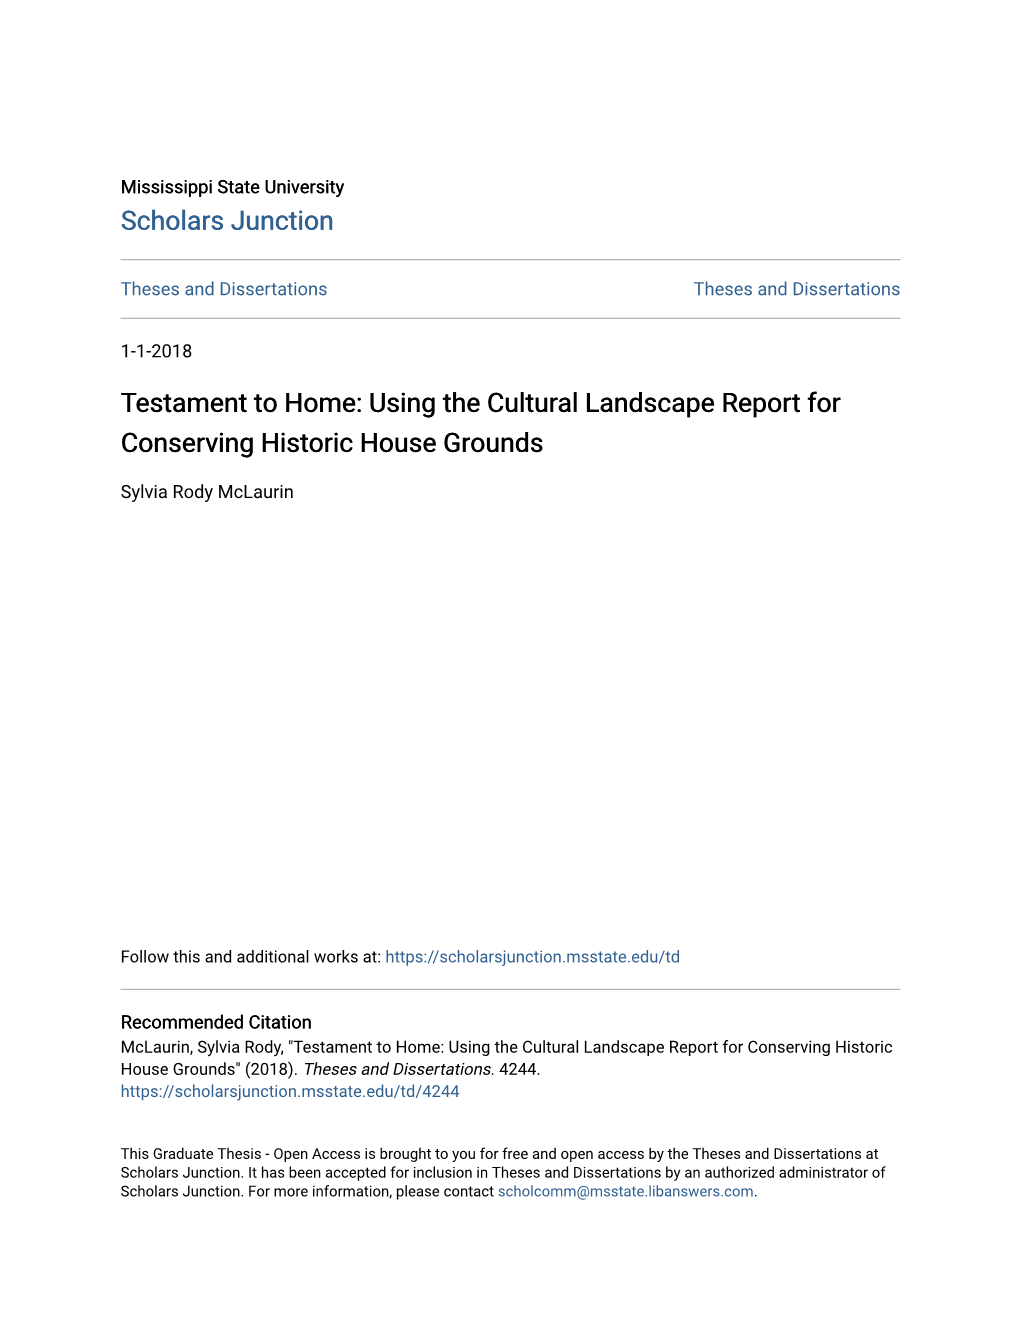 Using the Cultural Landscape Report for Conserving Historic House Grounds